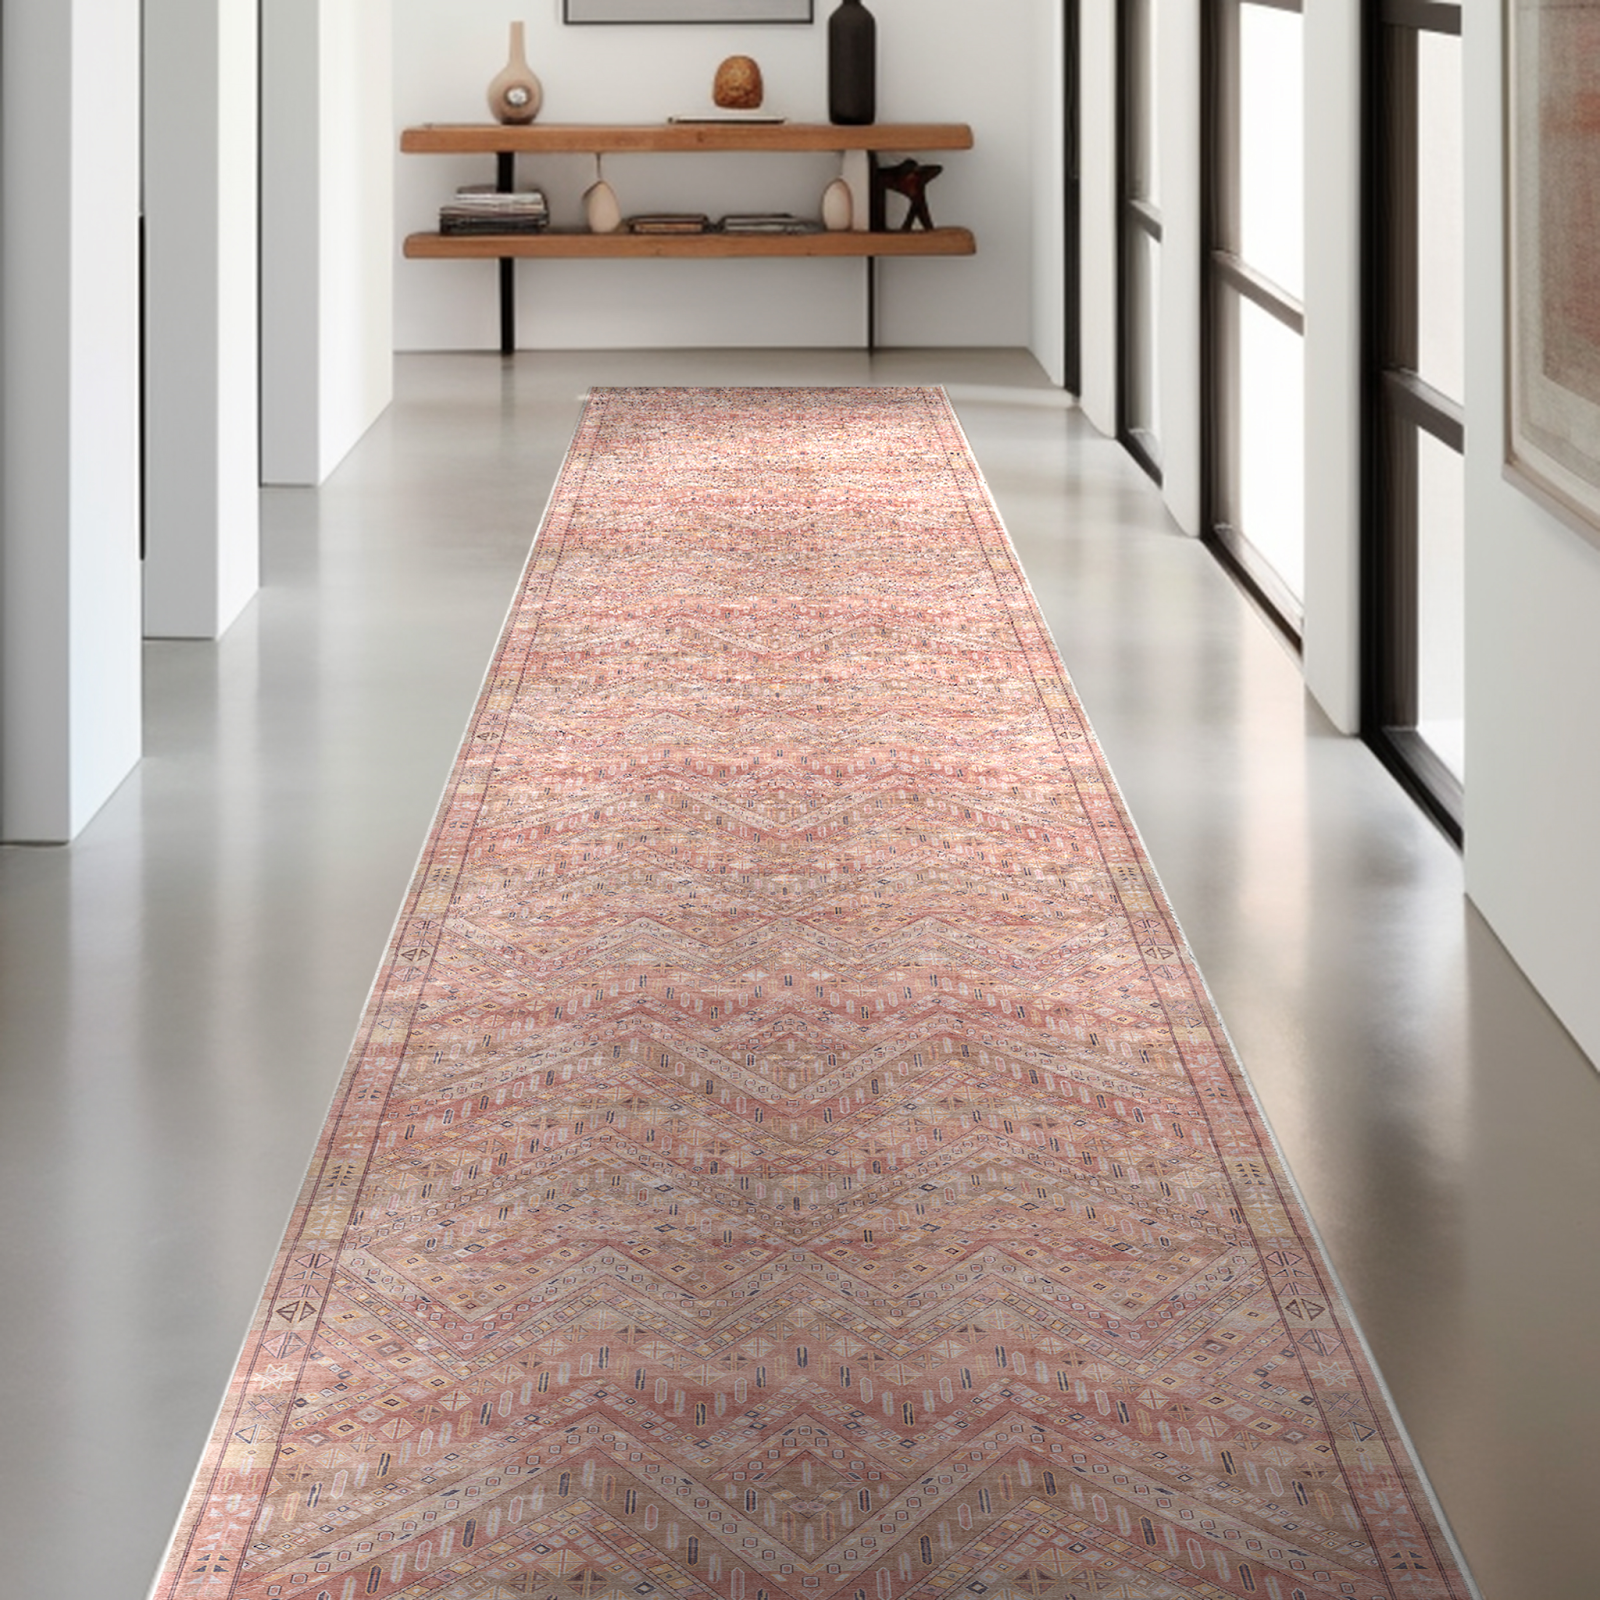 Measuring Up: Tips for Selecting the Right Size Runner Rug